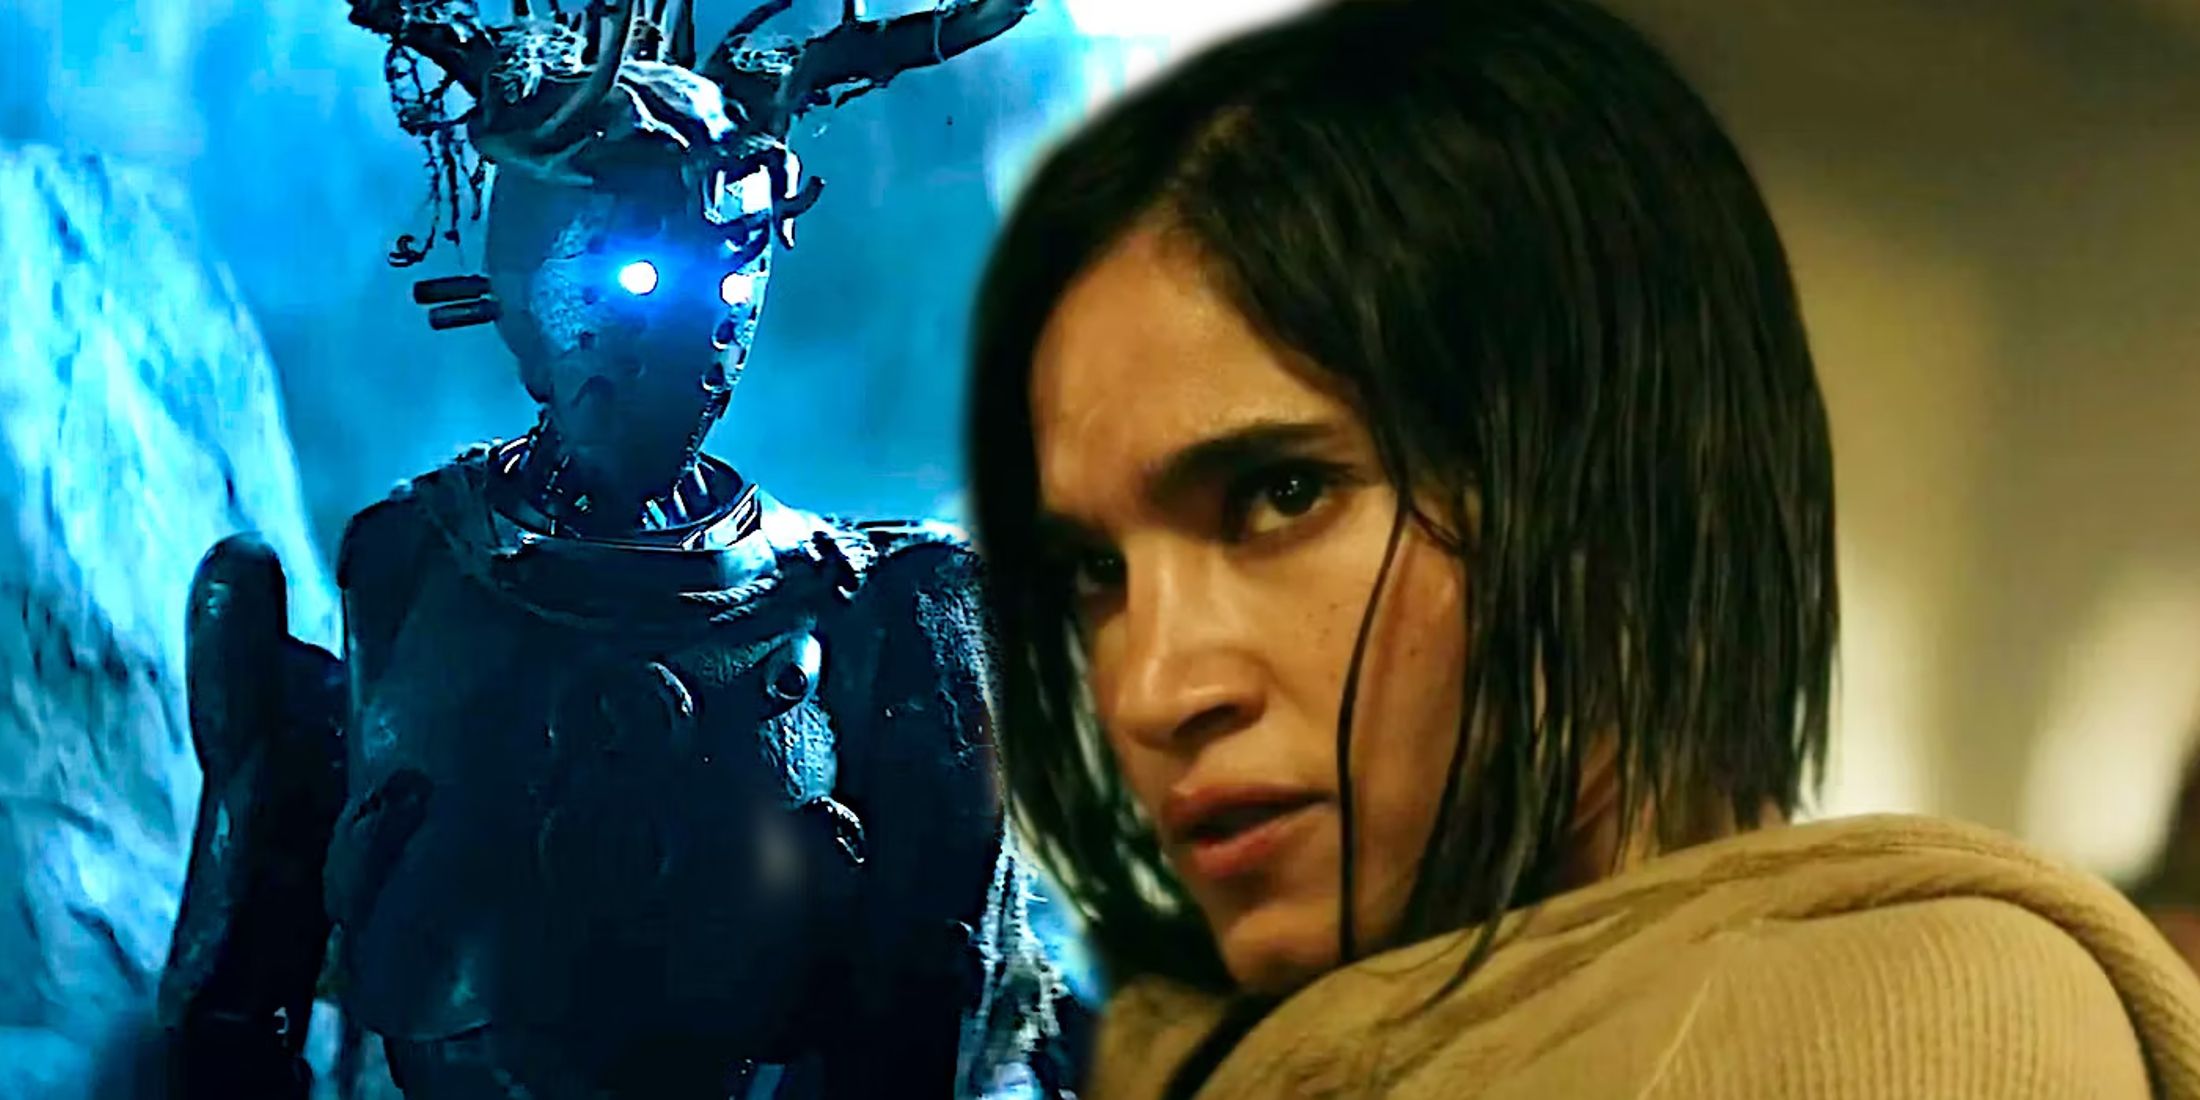 Jimmy the Robot voiced by Anthony Hopkins with glowing blue eyes next to Sofia Boutella as Kora looking angry in Rebel Moon